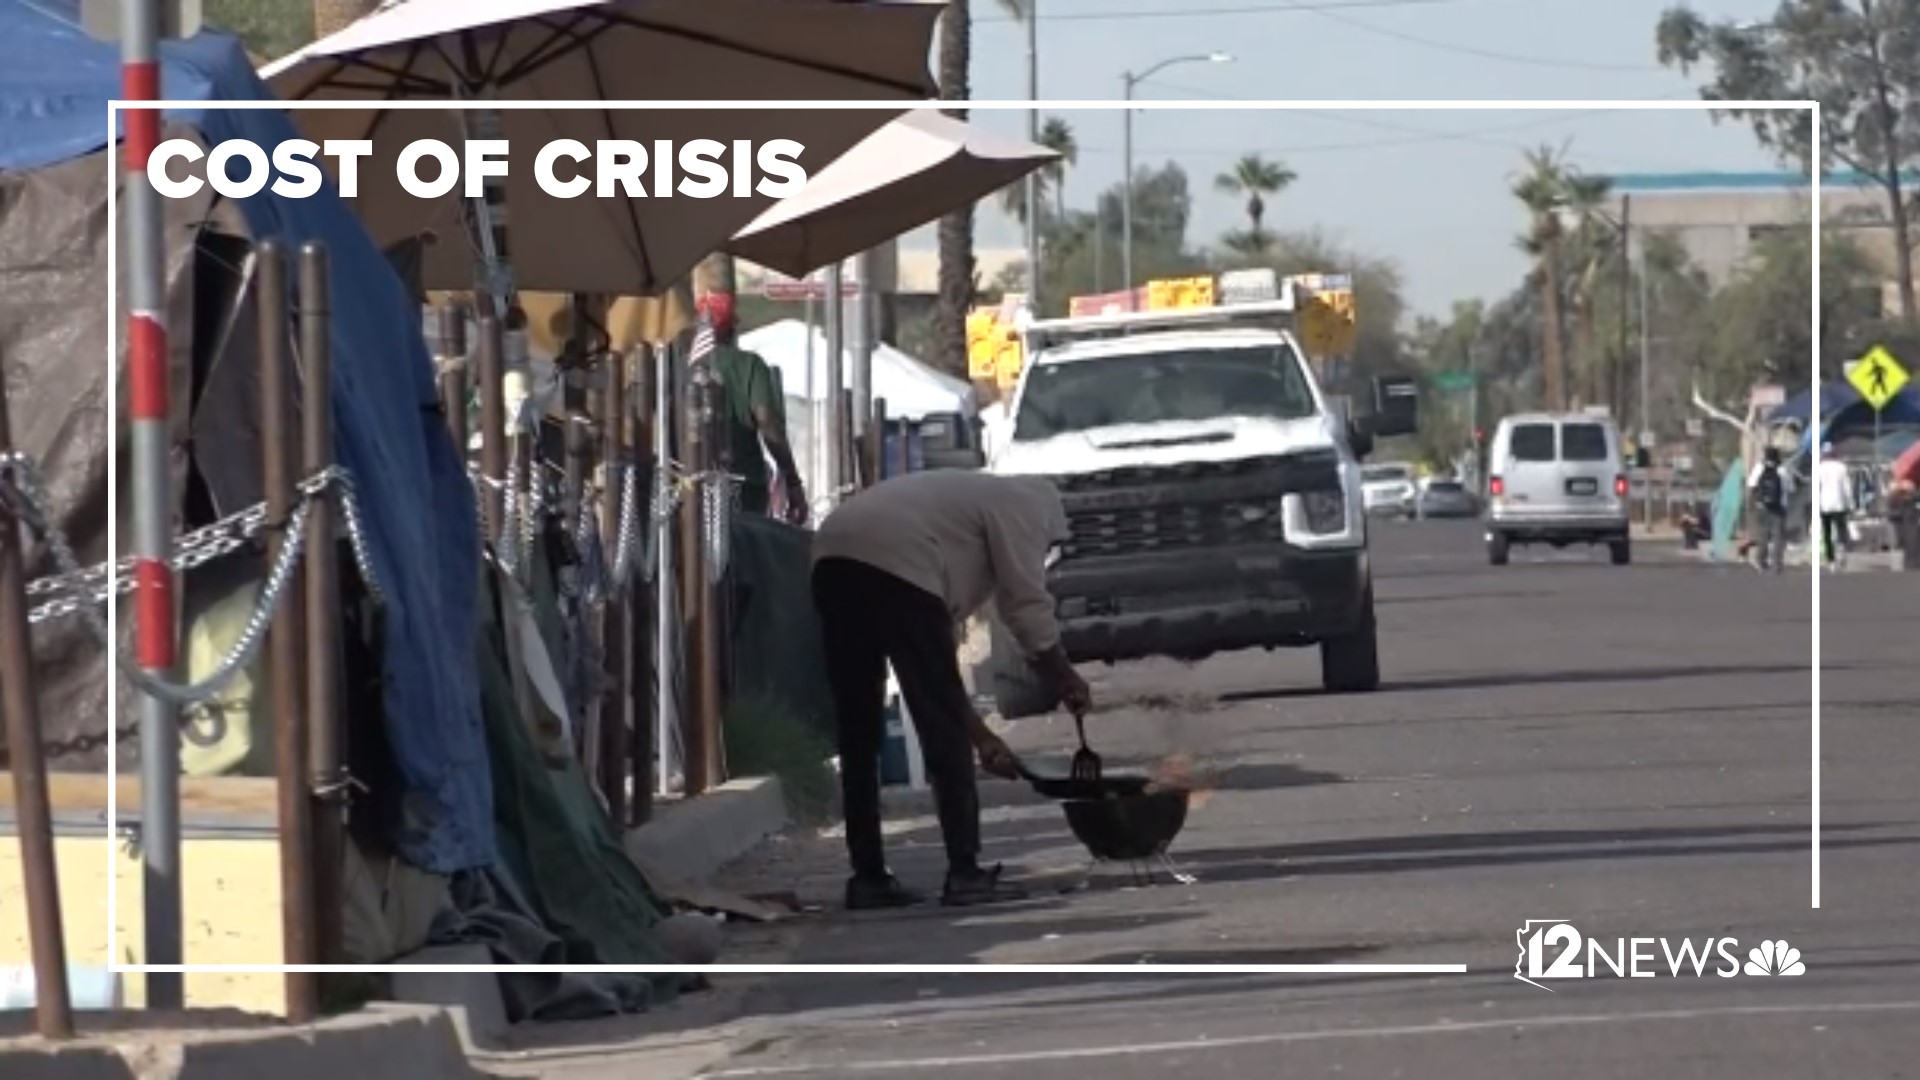 There are more people sleeping on the streets in the Valley than there are shelter beds available.